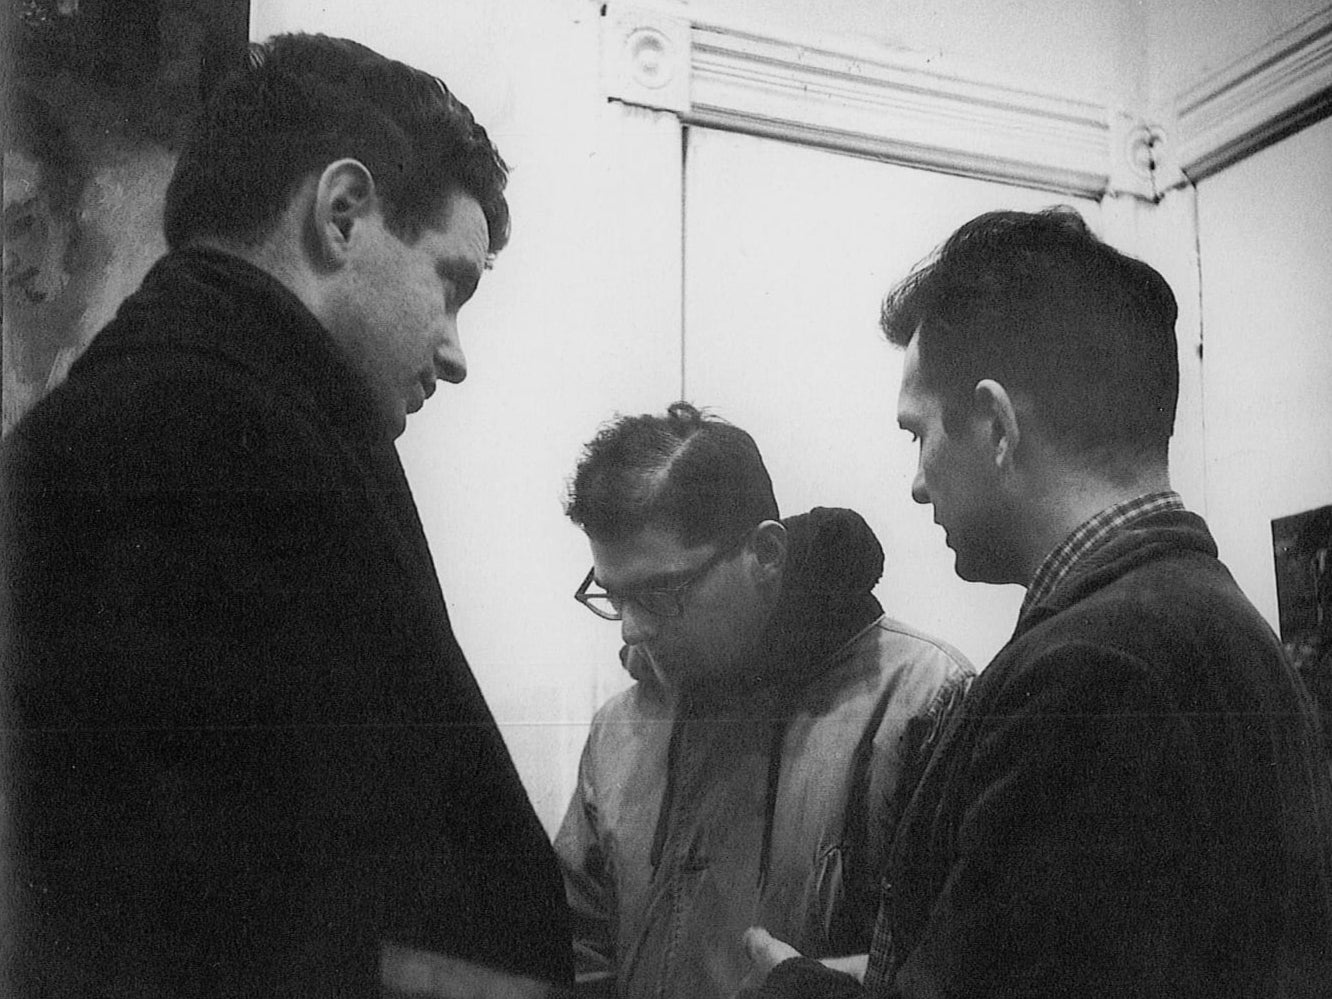 Amram, Ginsberg and Kerouac at a gallery opening in March 1959